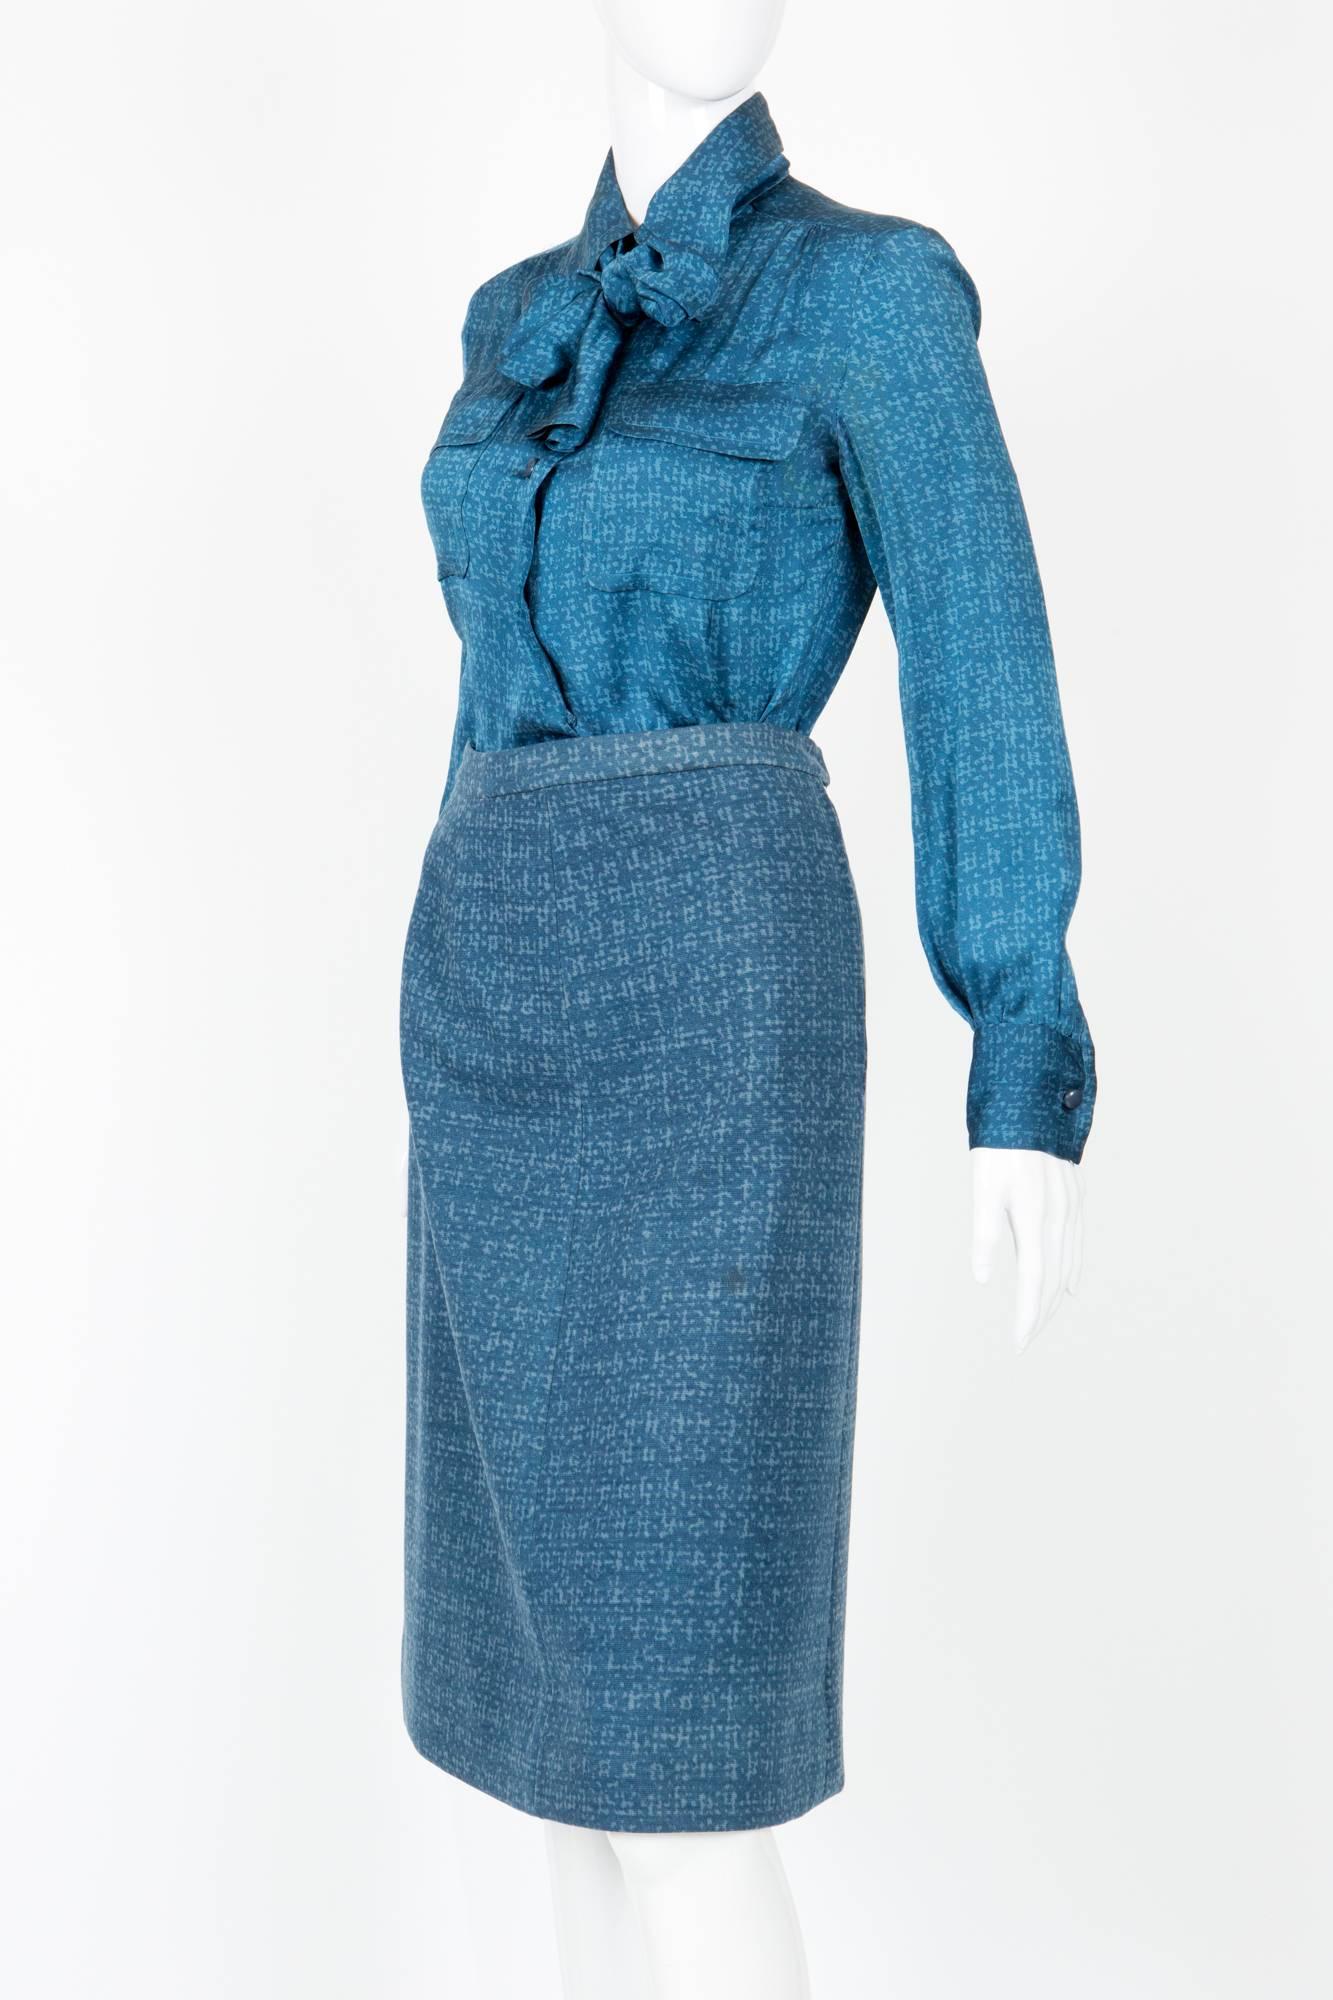 1973s Haute Couture winter Christian Dior by Marc Bohan blue printed suit numbered 002856 featuring a silk shirt top with a separated bow tie and a matching print wool skirt.
In good vintage condition. Made in France.
Estimated size 36fr/ US4/